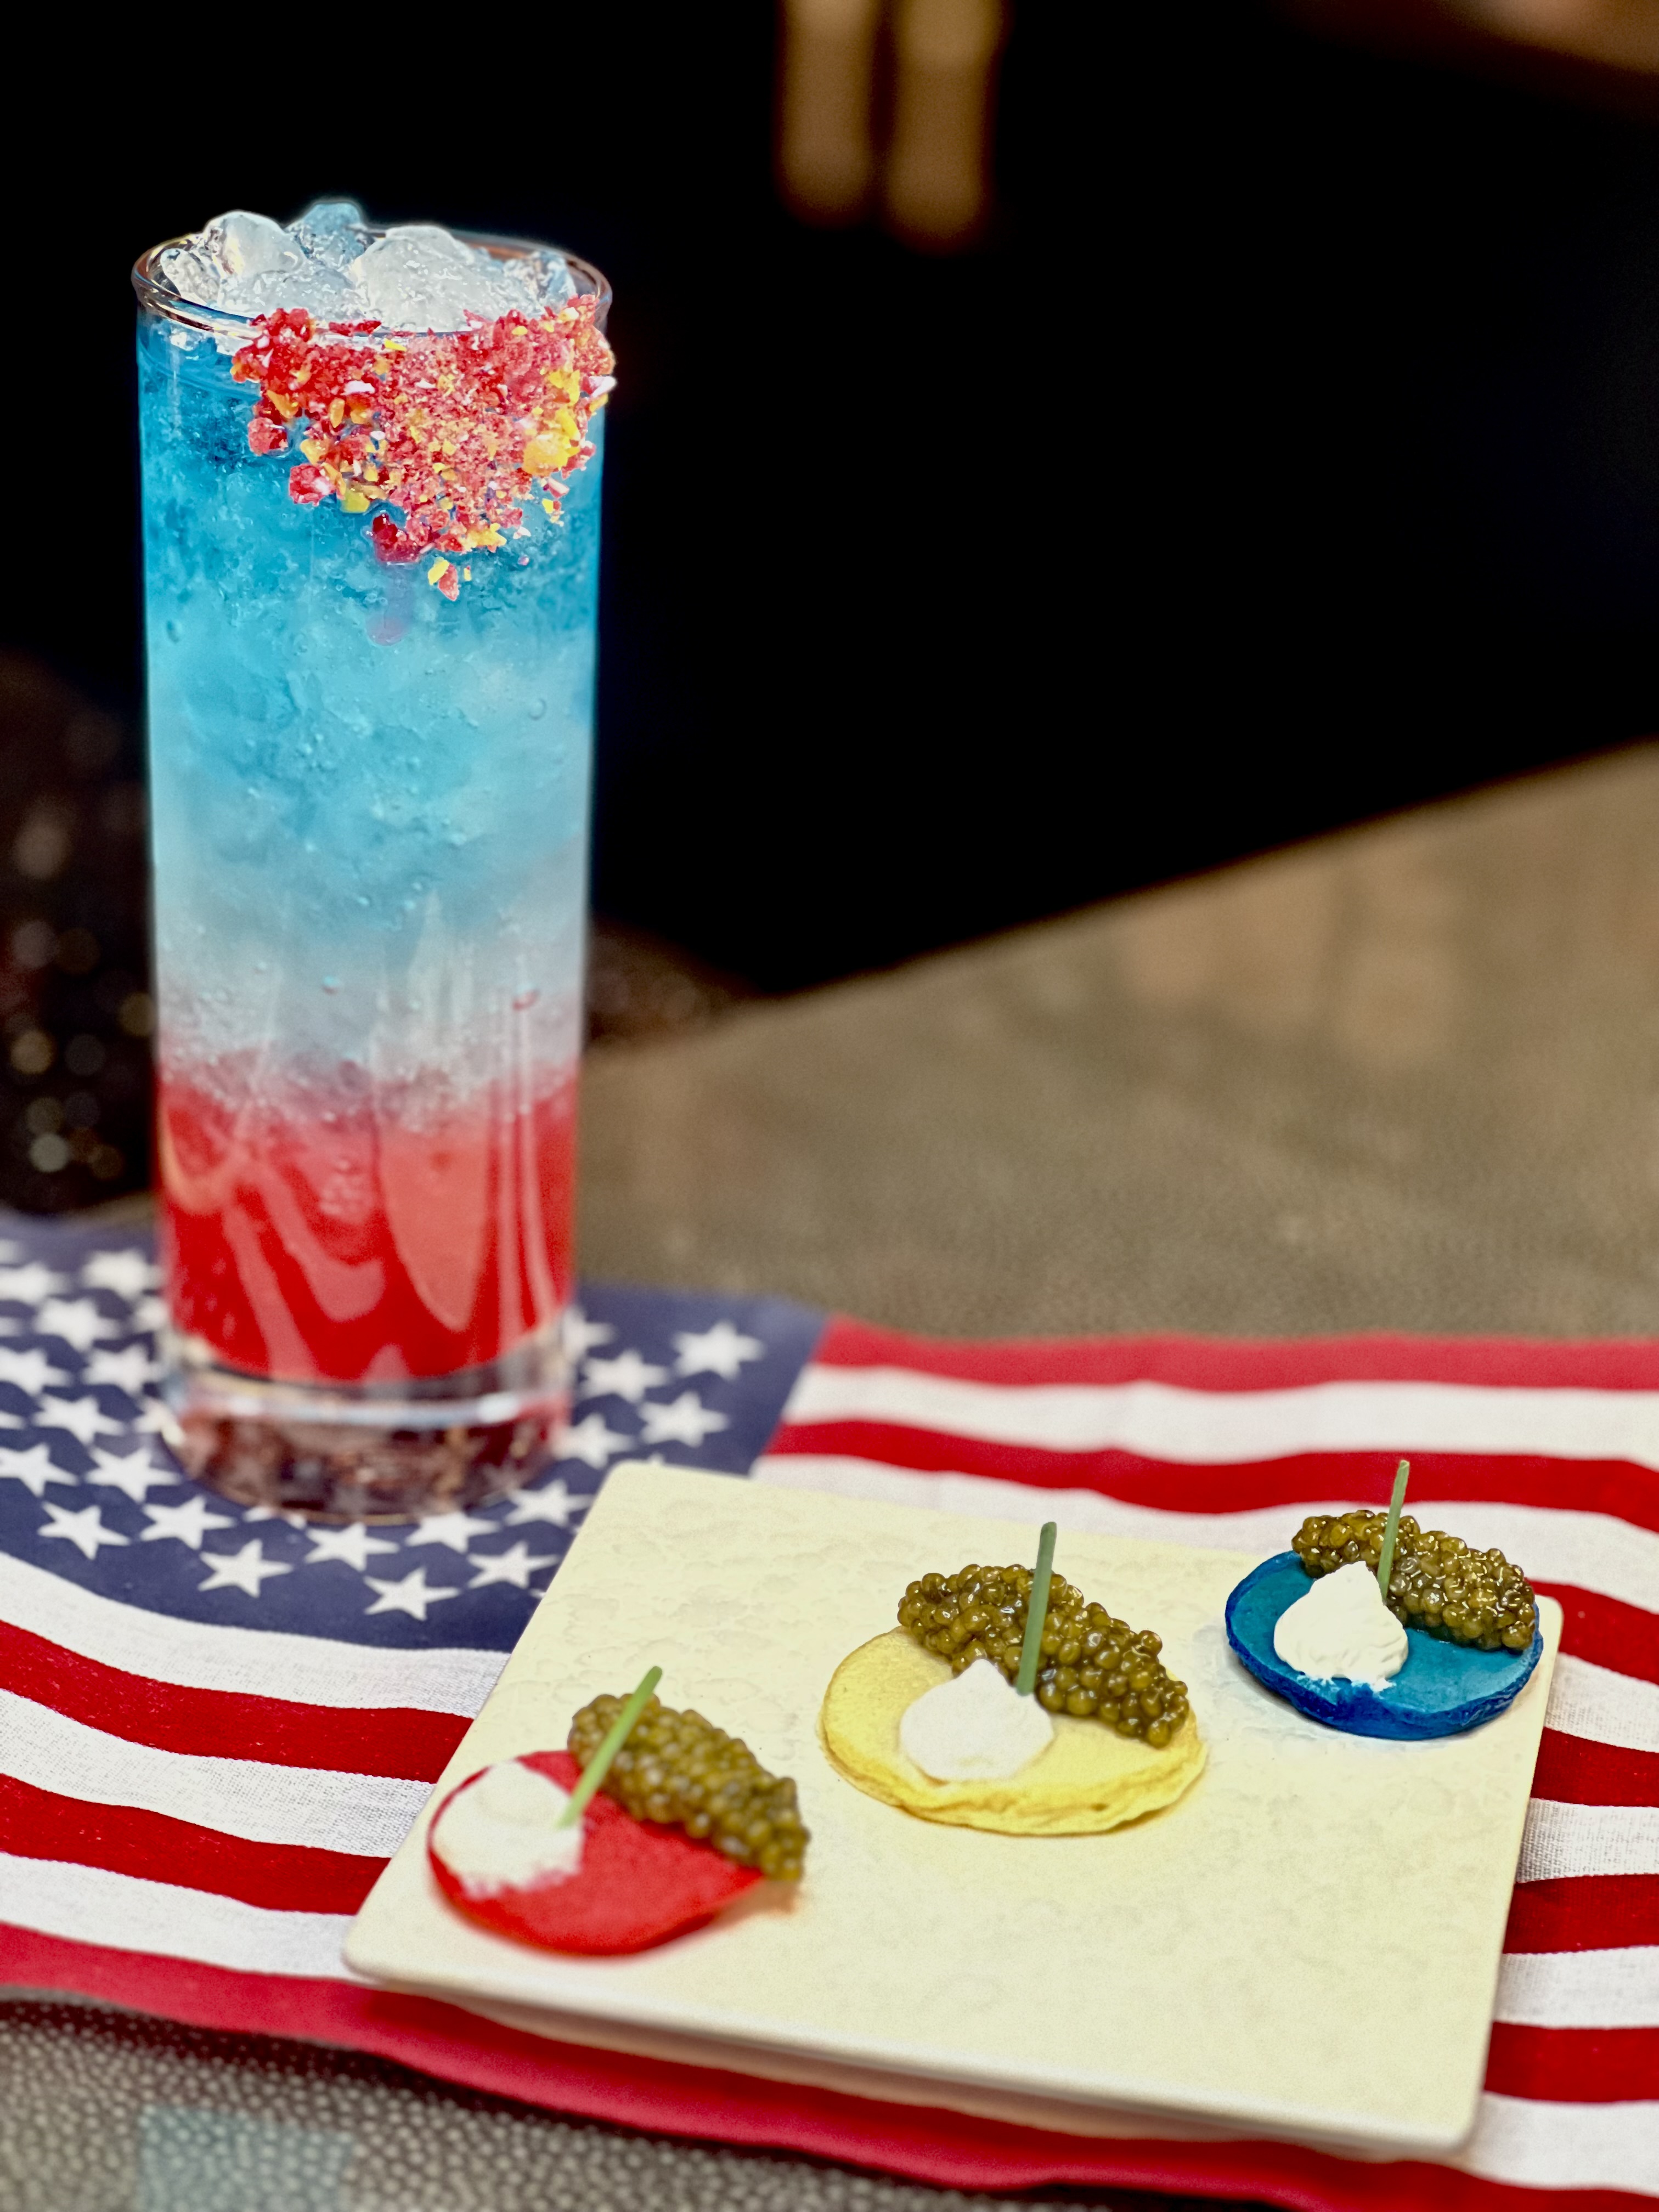 Caviar Trio Tasting and Rocket Pop Cocktail Sets Off Your 4th of July Holiday Weekend at Chef Shaun Hergatt's Caviar Bar Seafood & Restaurant in Resorts World Las Vegas